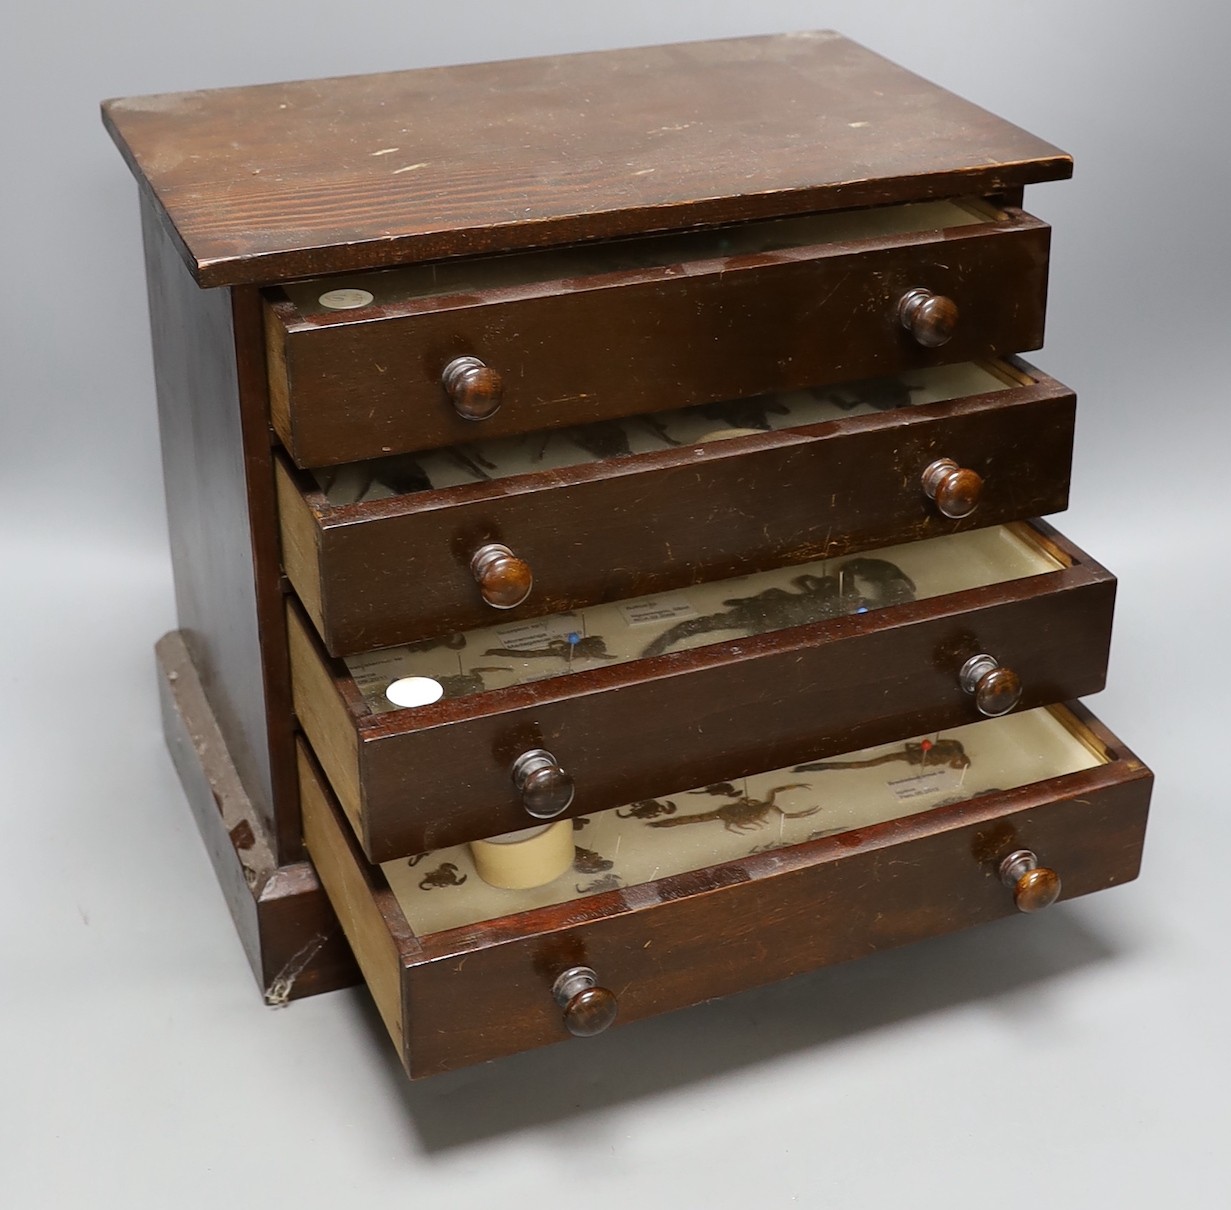 Entomology- a collection of scorpion specimens in a wood chest of four drawers, 30. 5 cm high, 33 cm wide, 21 cm deep